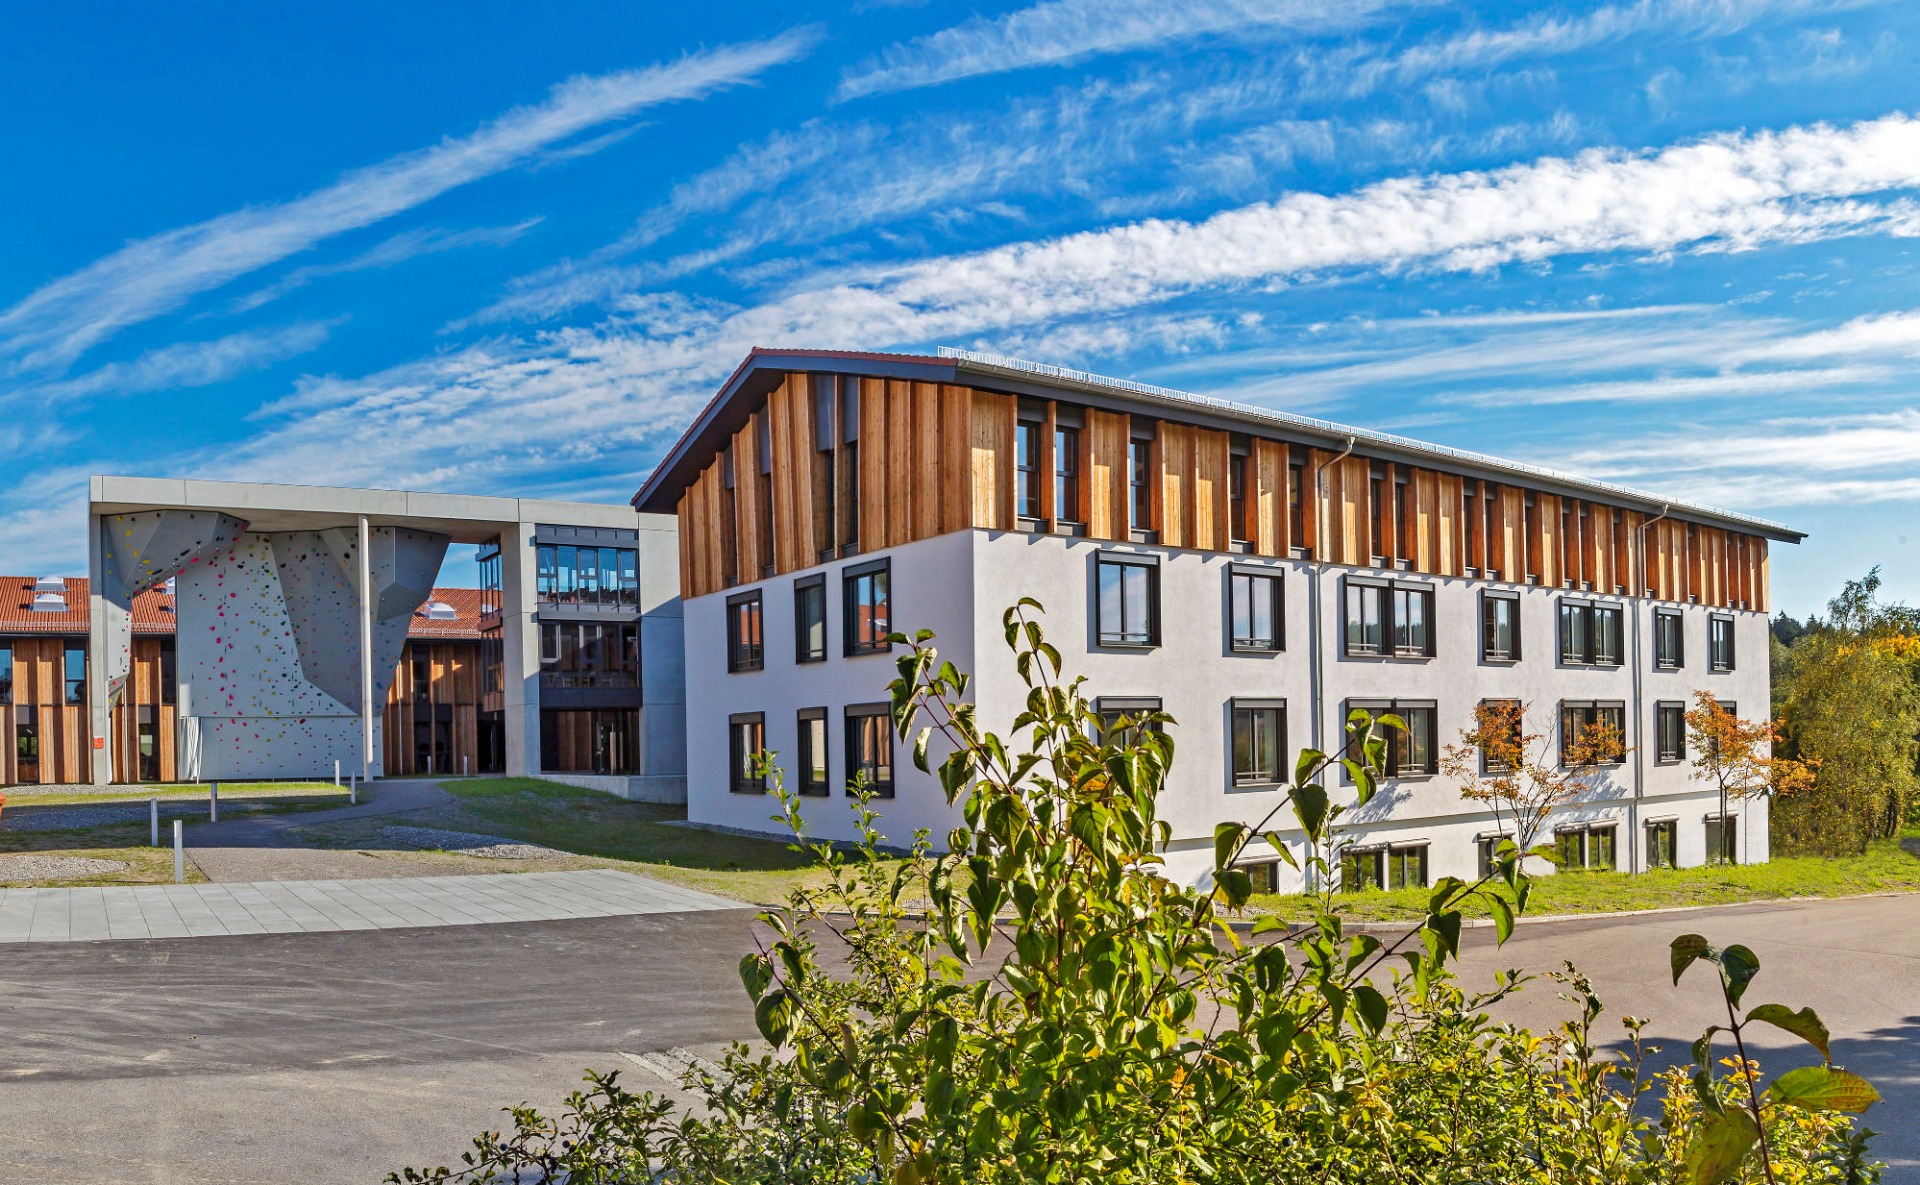 The VAUDE company premises are located in sunny southern Germany near Lake Constance.